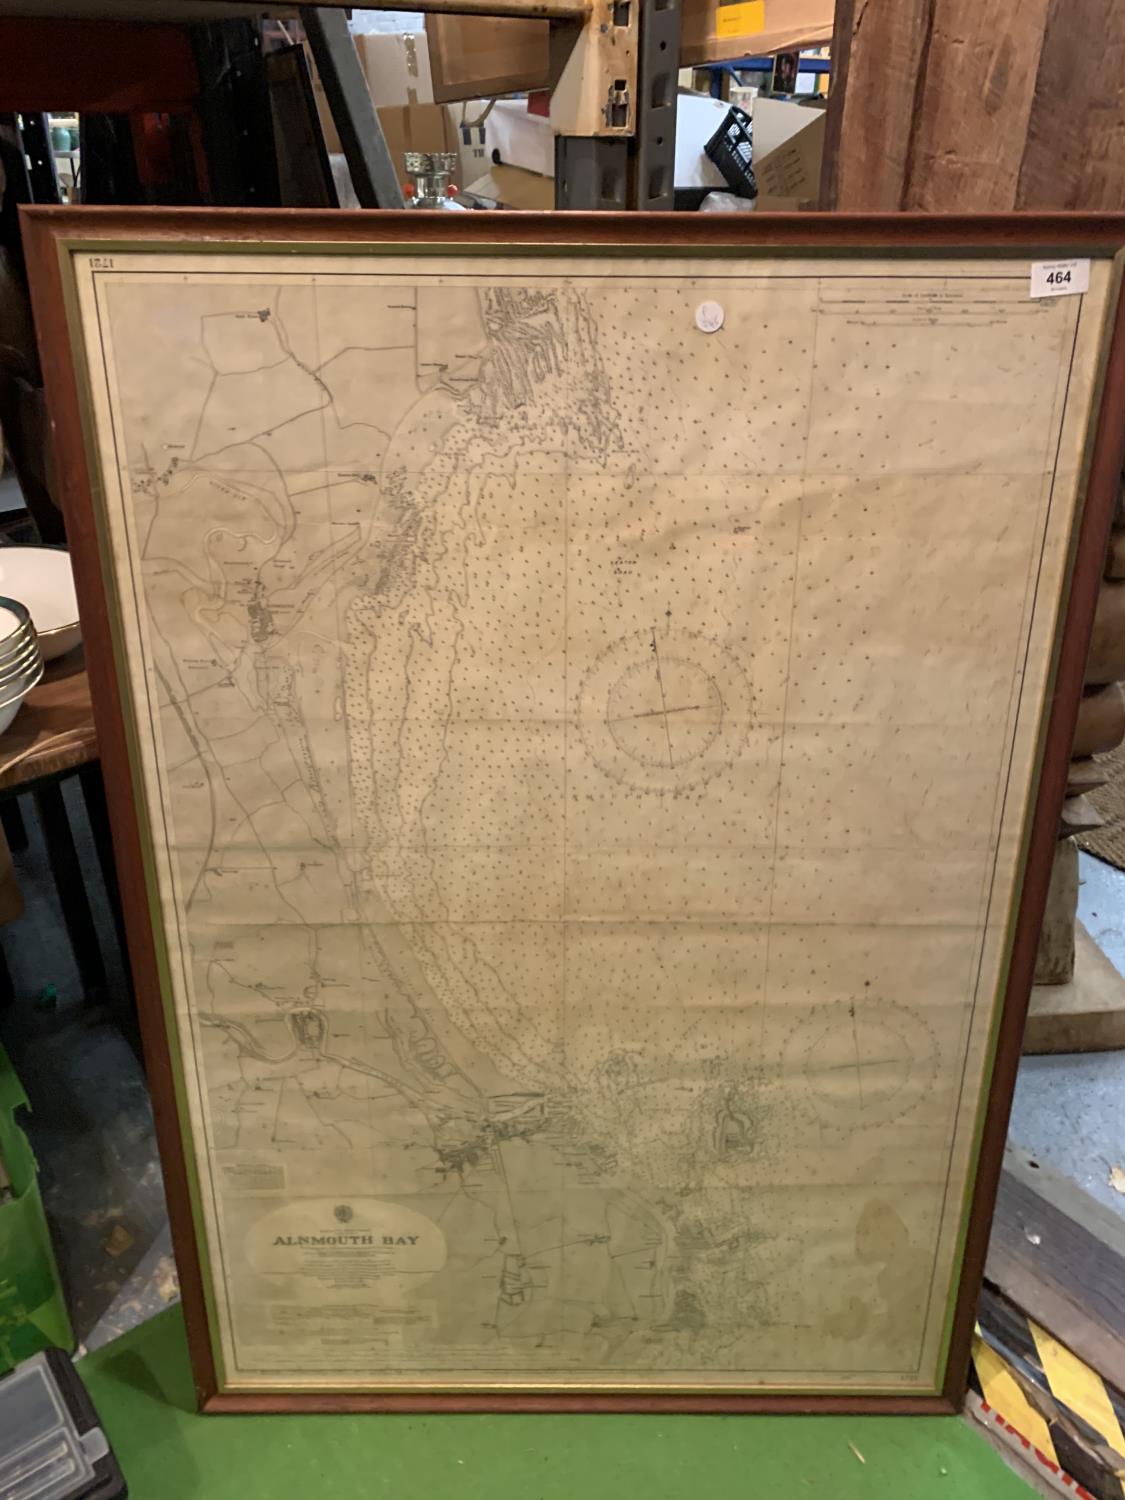 A LARGE FRAMED MAP OF ALNMOUTH BAY